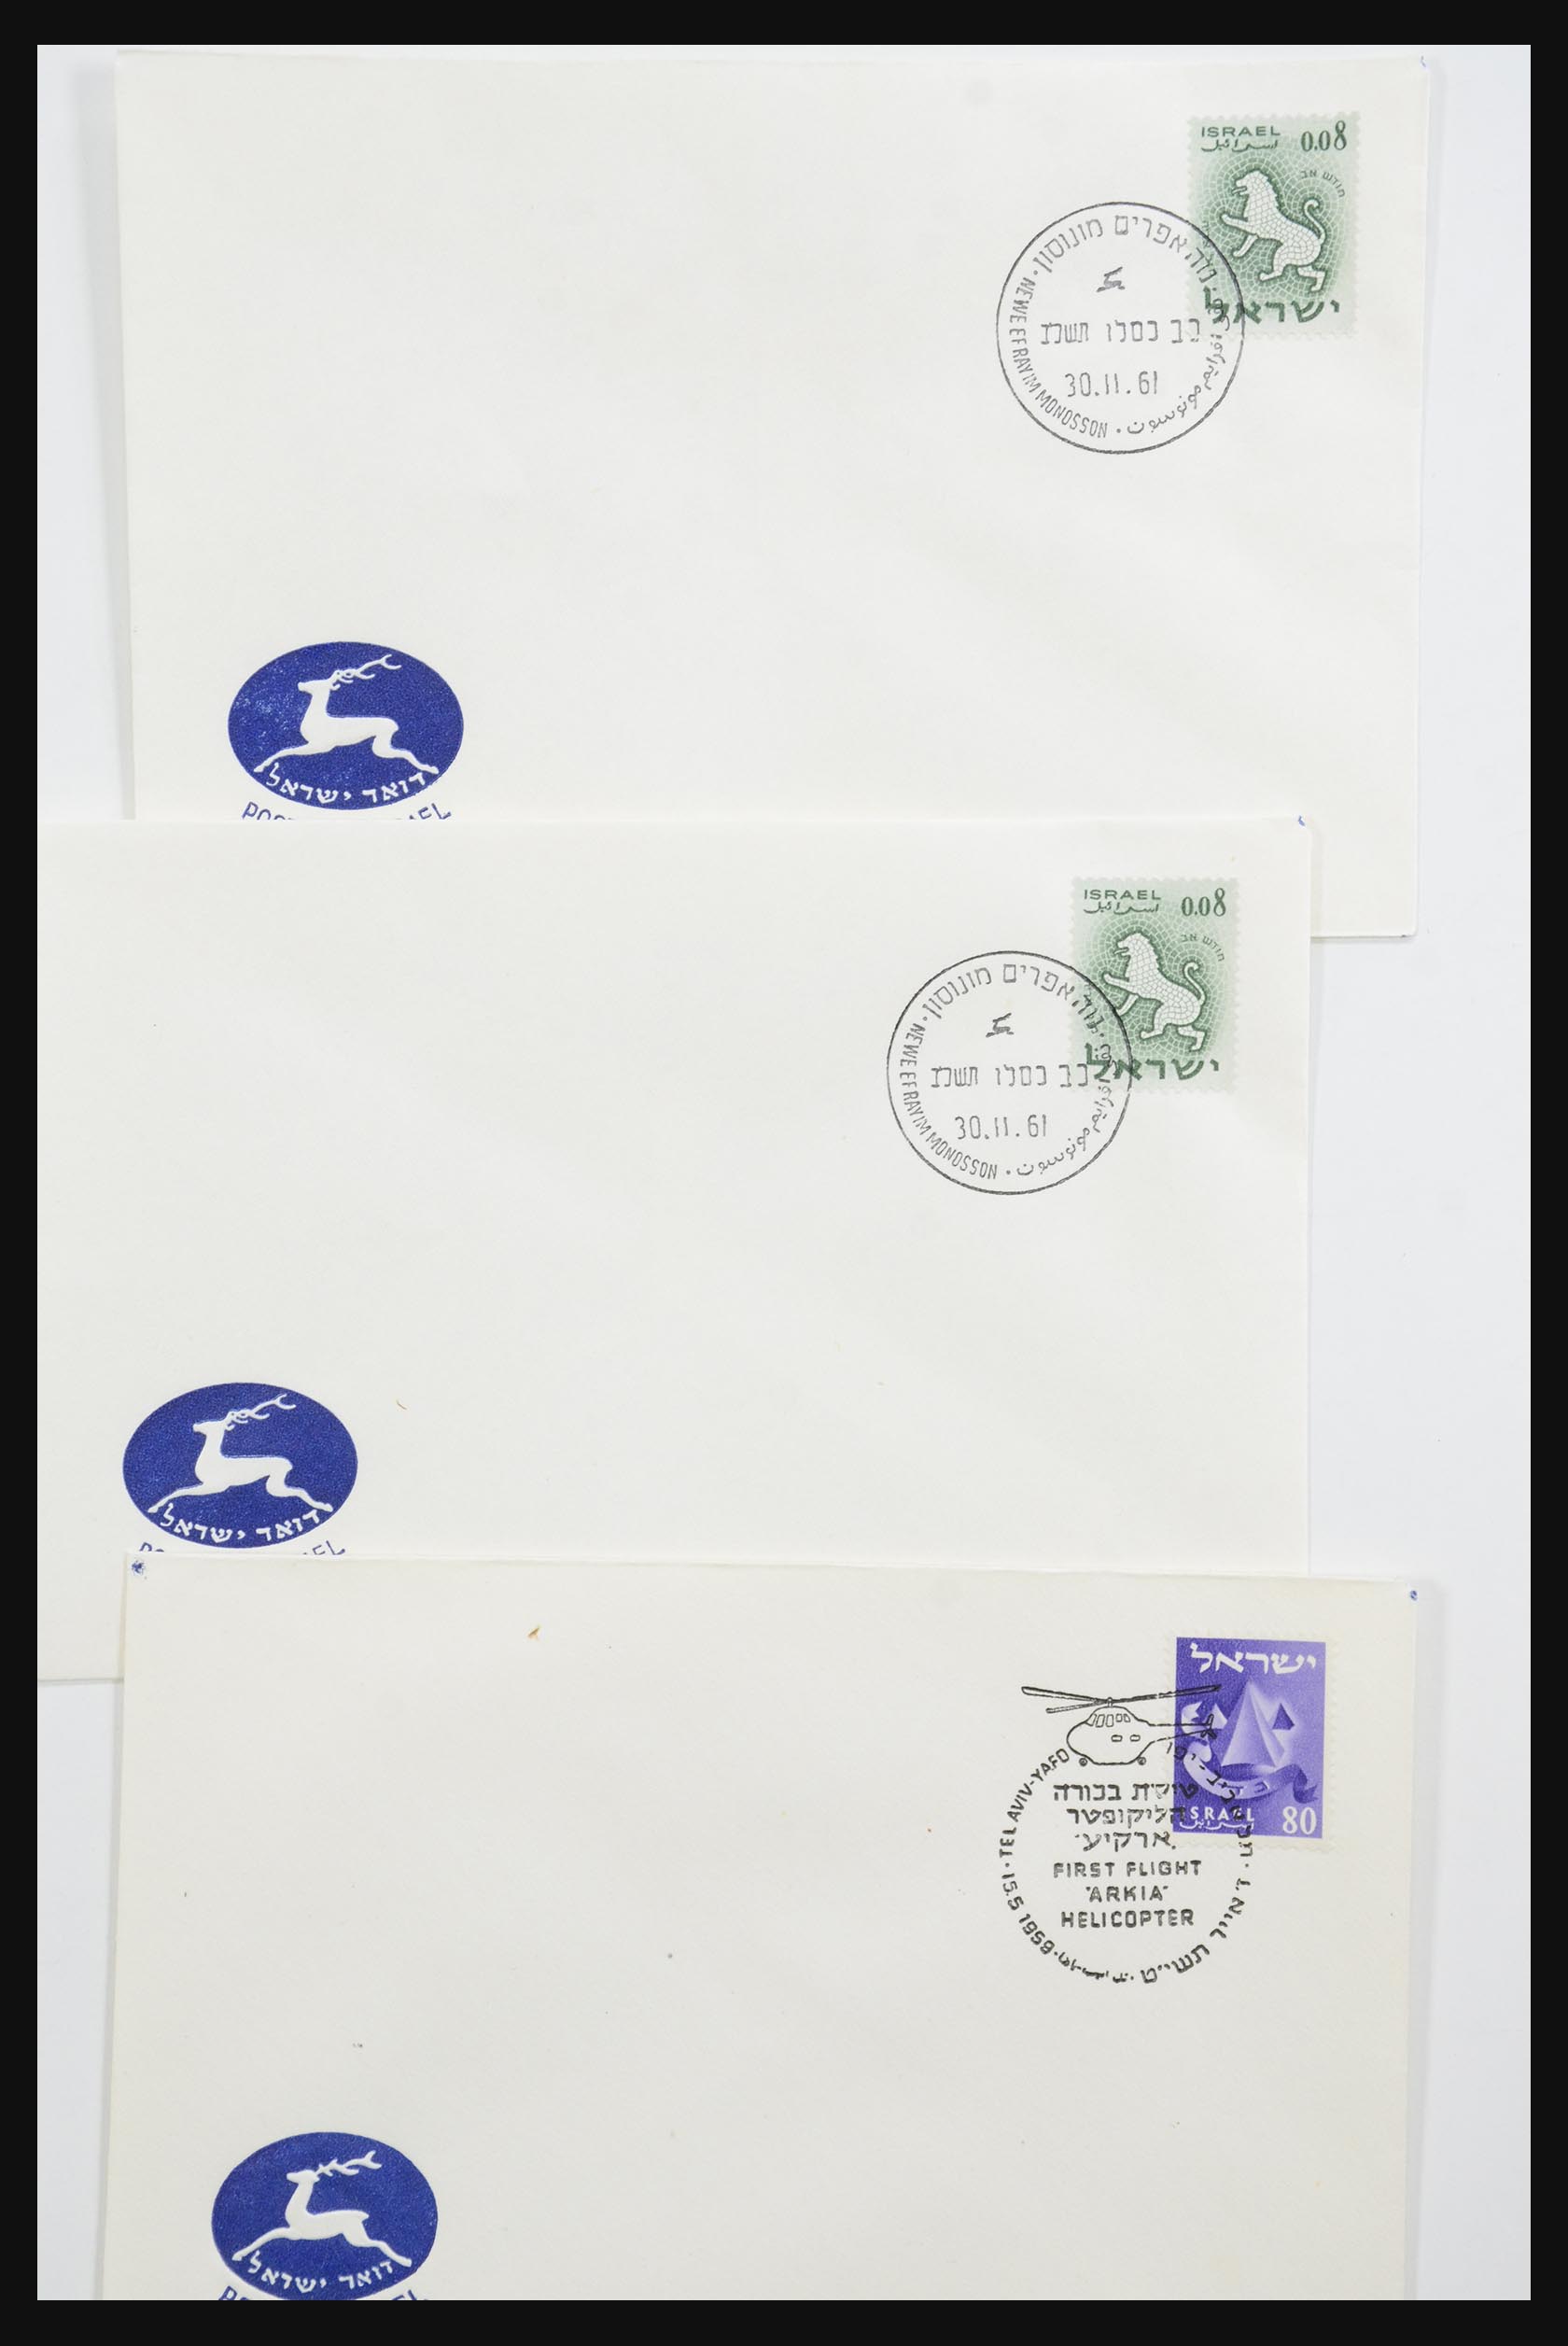 31924 050 - 31924 Israël fdc-collectie 1957-2003.